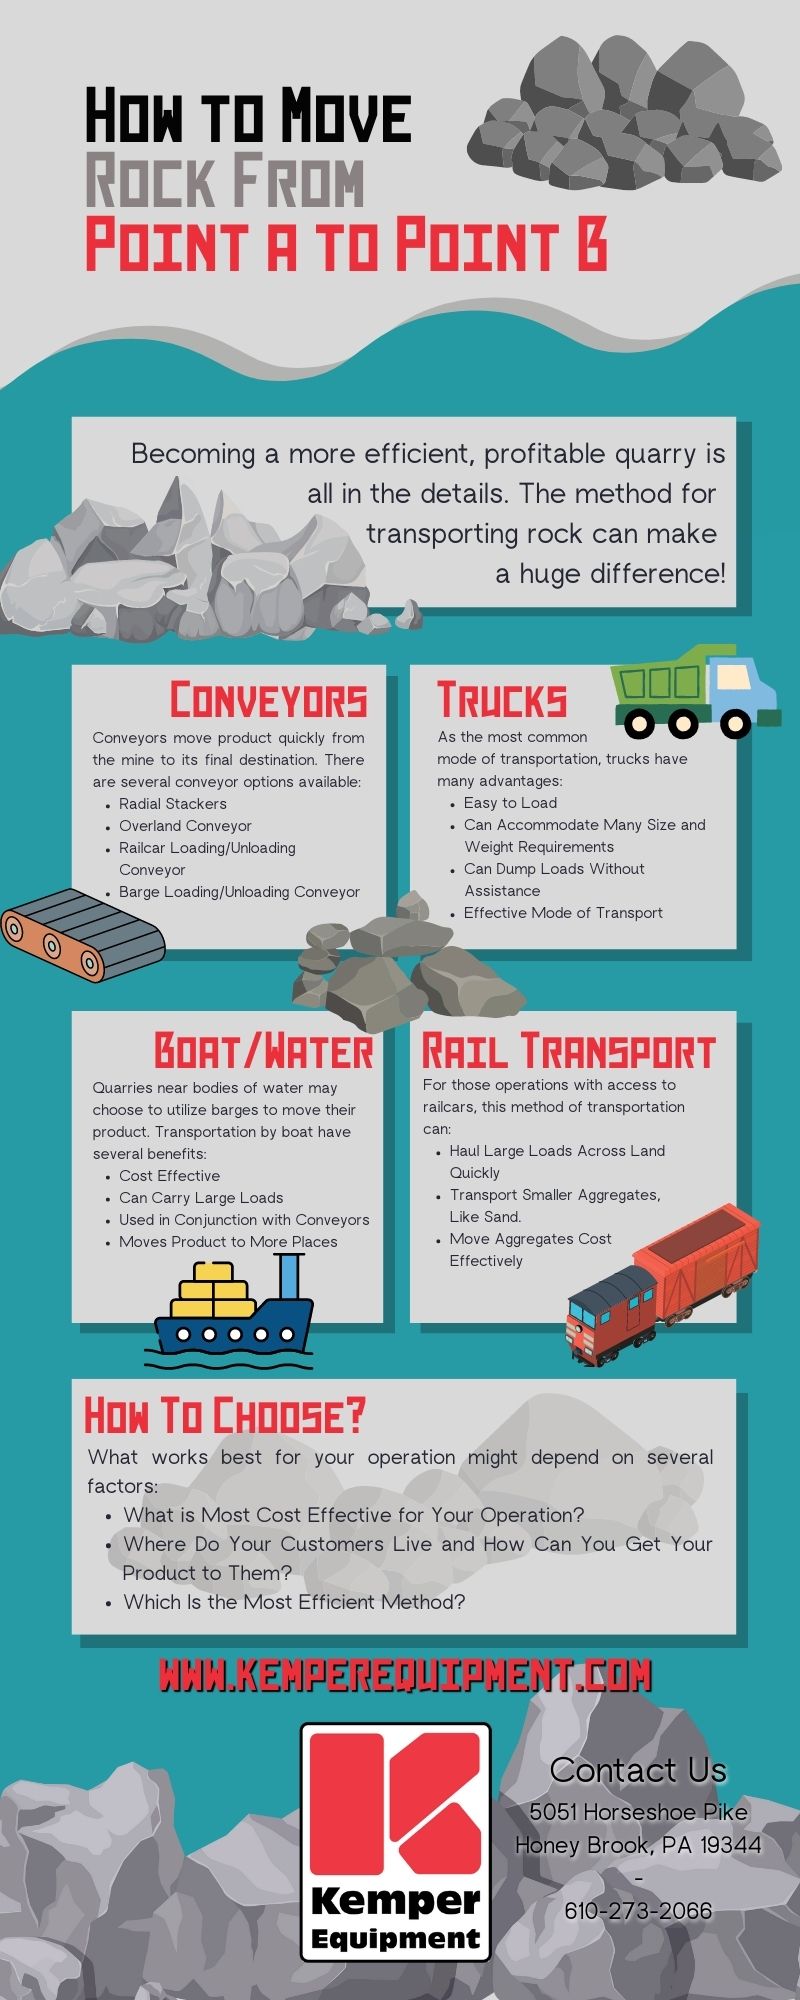 An infographic detailing how to transport rock